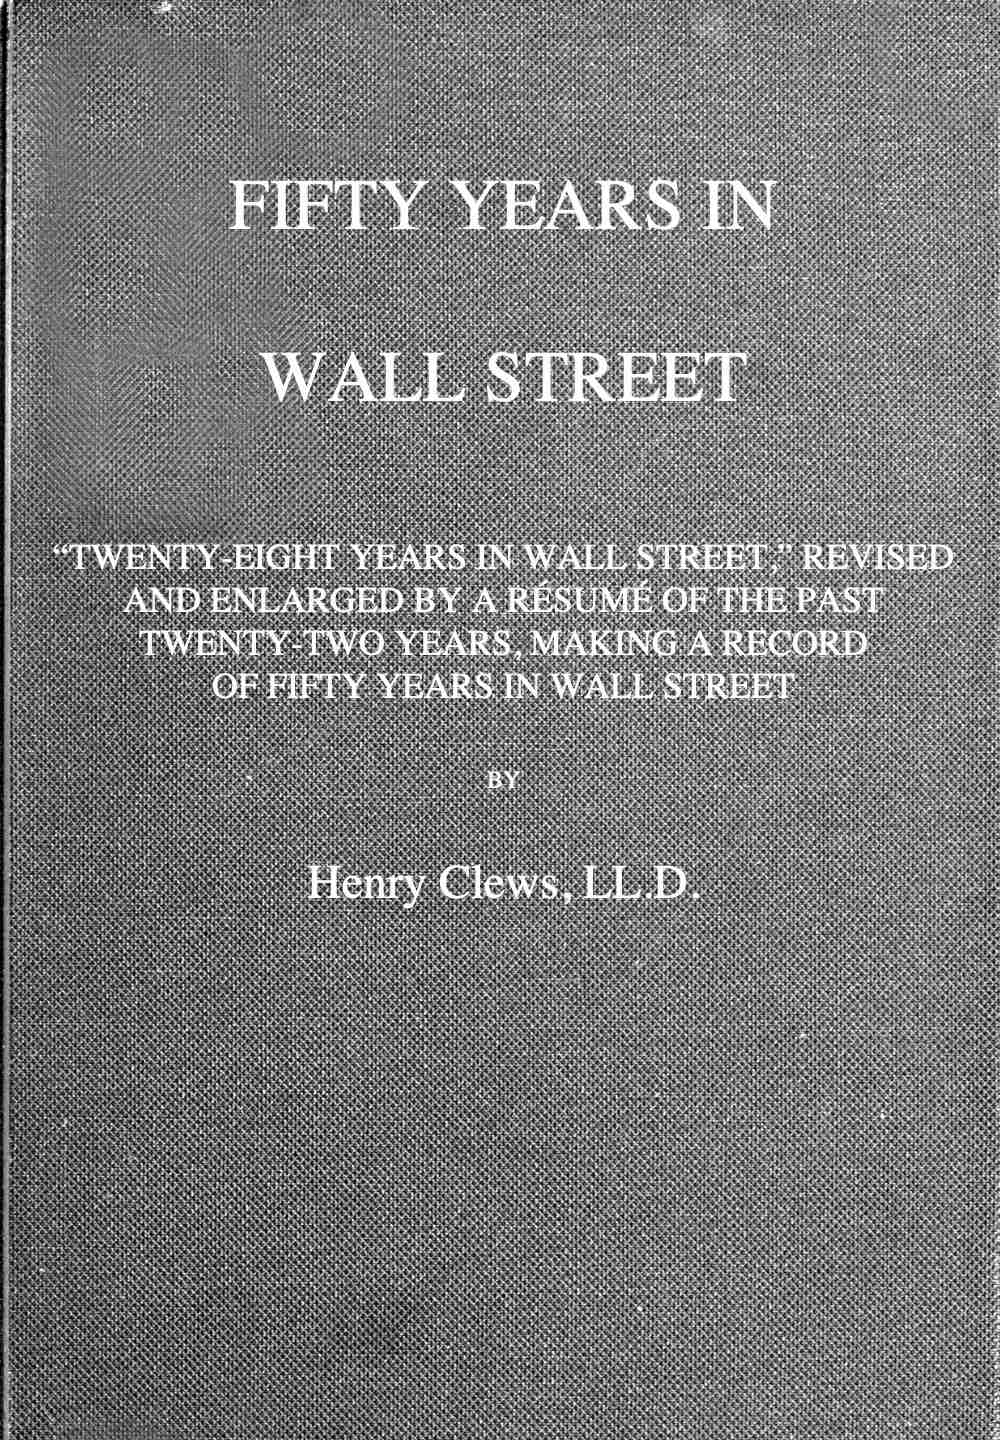 Fifty Years in Wall Street Henry Clews, LL.D. image